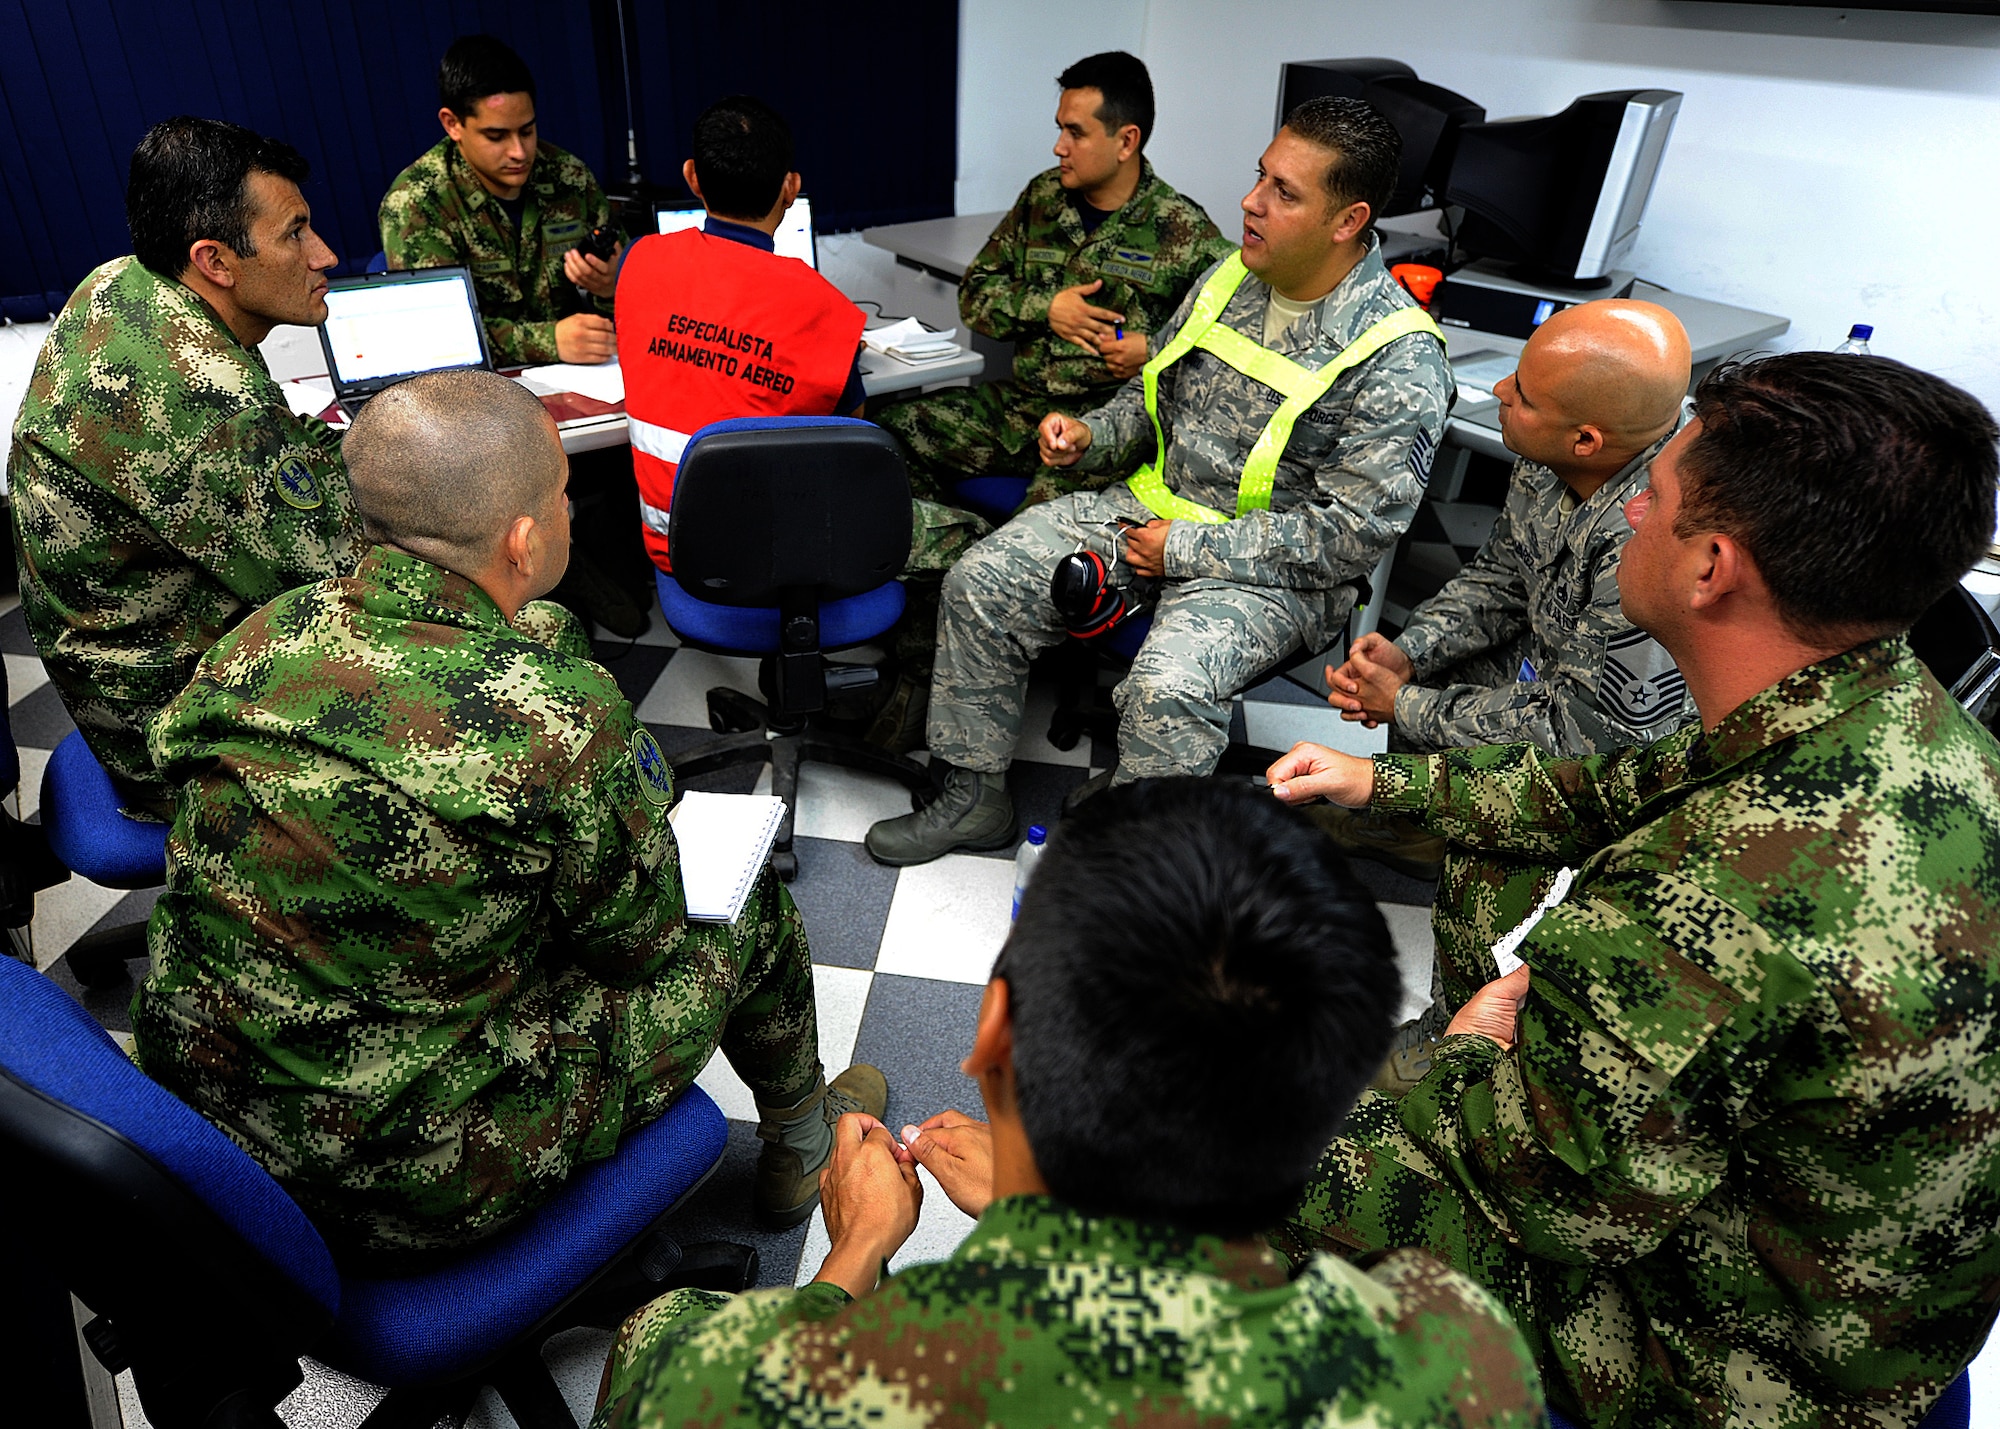 Technical Sgt. Melvin Rosario, Inter-American Air Forces Academy instructor, discusses maintenance operations center procedures to members of the Colombian air force June 13, at Comando Aéreo de Combate No. 1 base, Palanquero, Colombia, as part of a month-long Air Mobility Command Building Partner Capacity mission. (U.S. Air Force photo by Tech. Sgt. Lesley Waters)